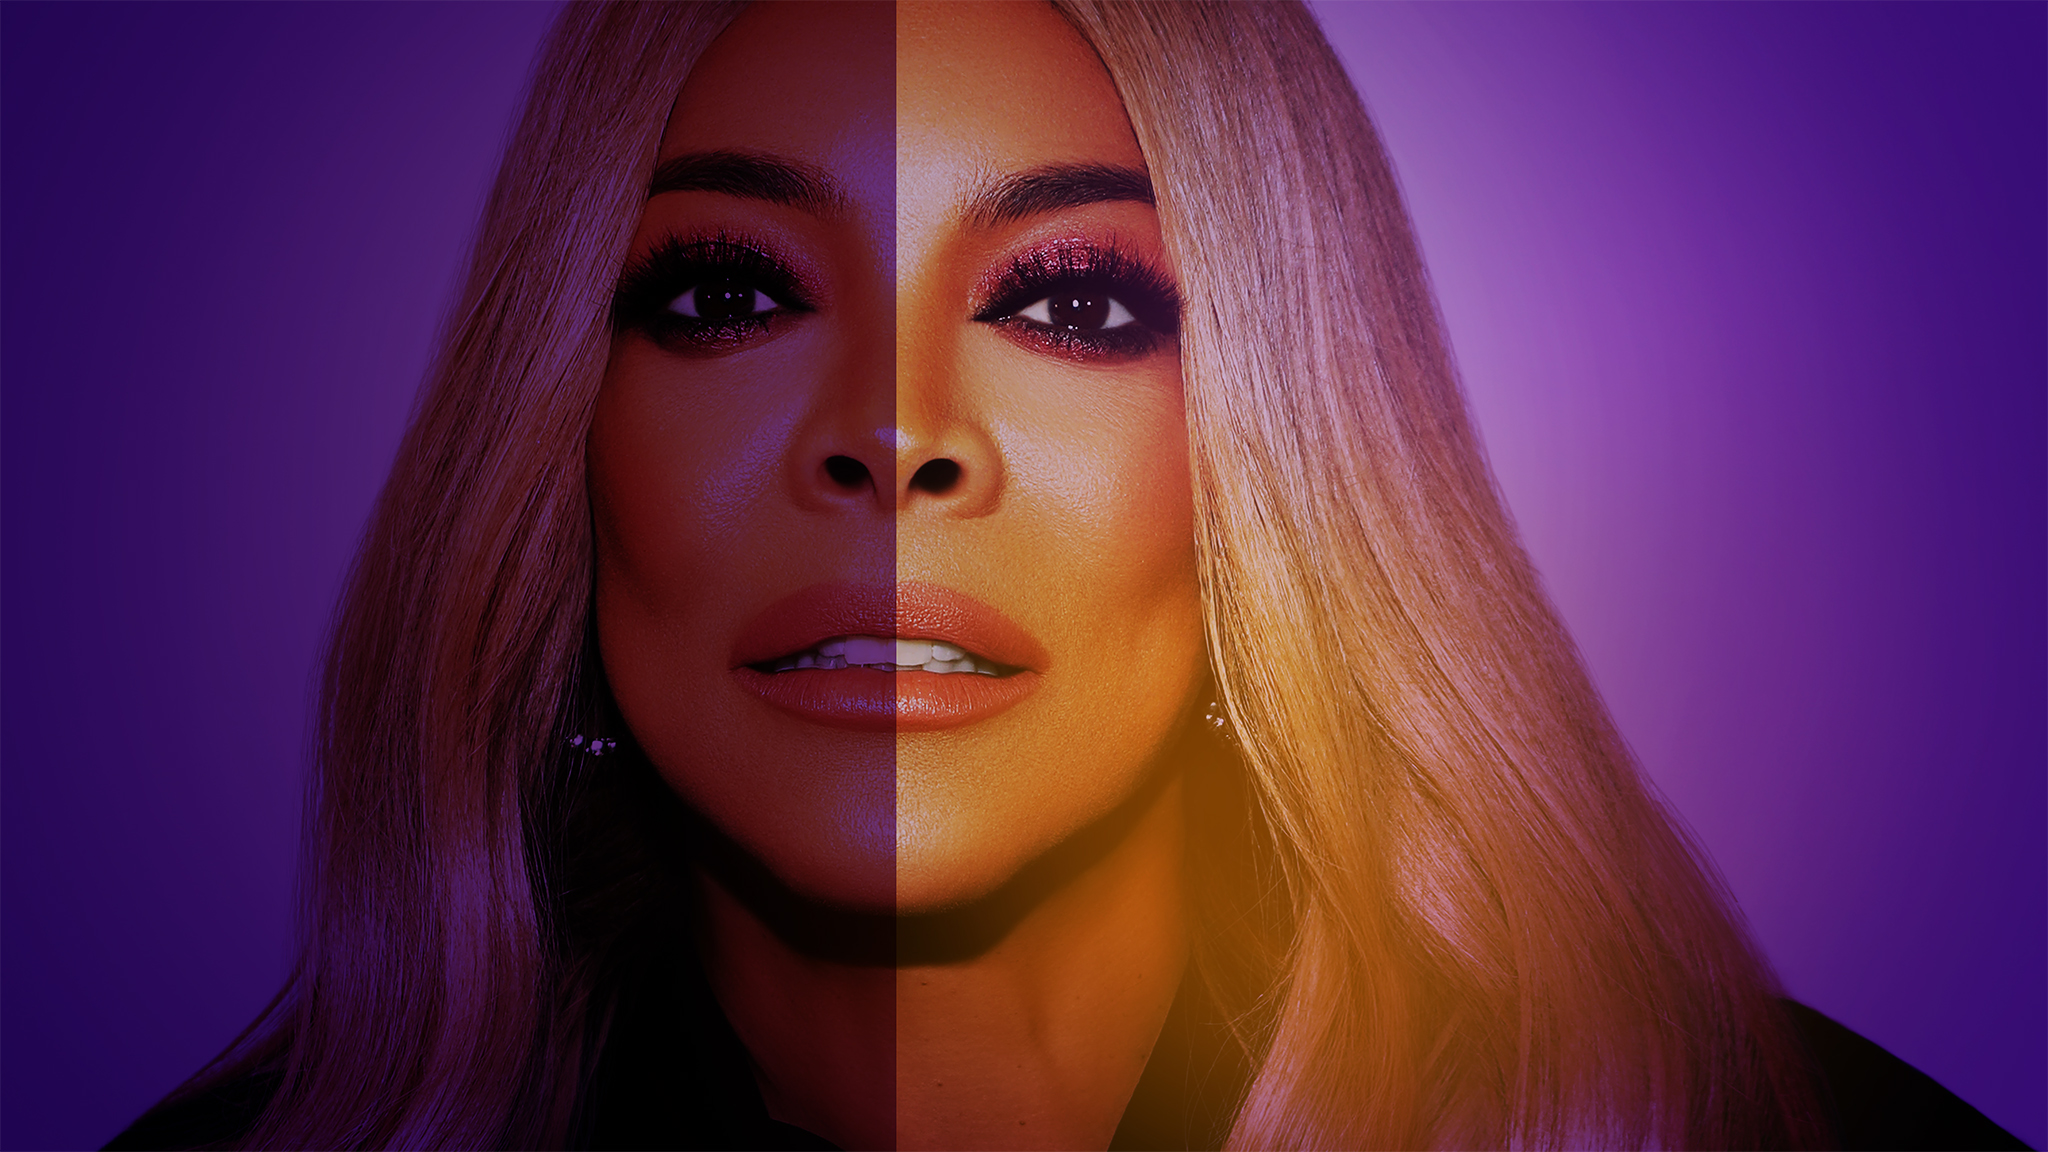 Was ‘Where is Wendy Williams?’ Exploitative or Just Another Chapter in Williams Saga?